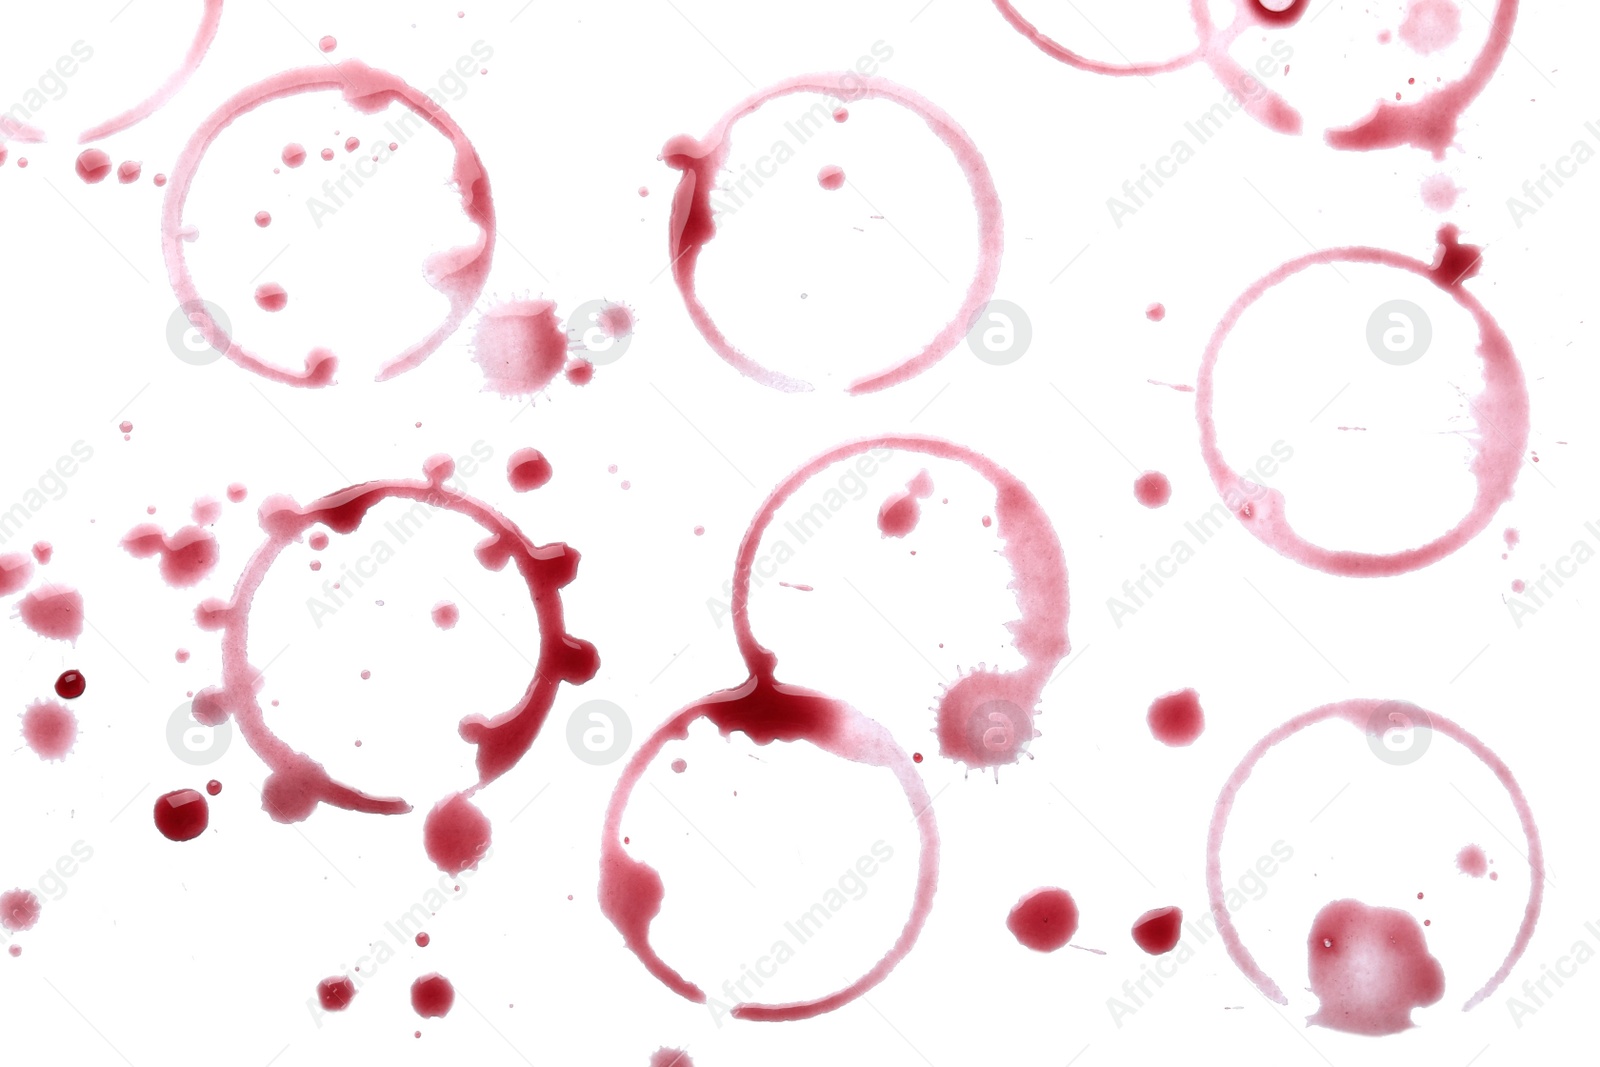 Photo of Red wine rings and drops on white background, top view